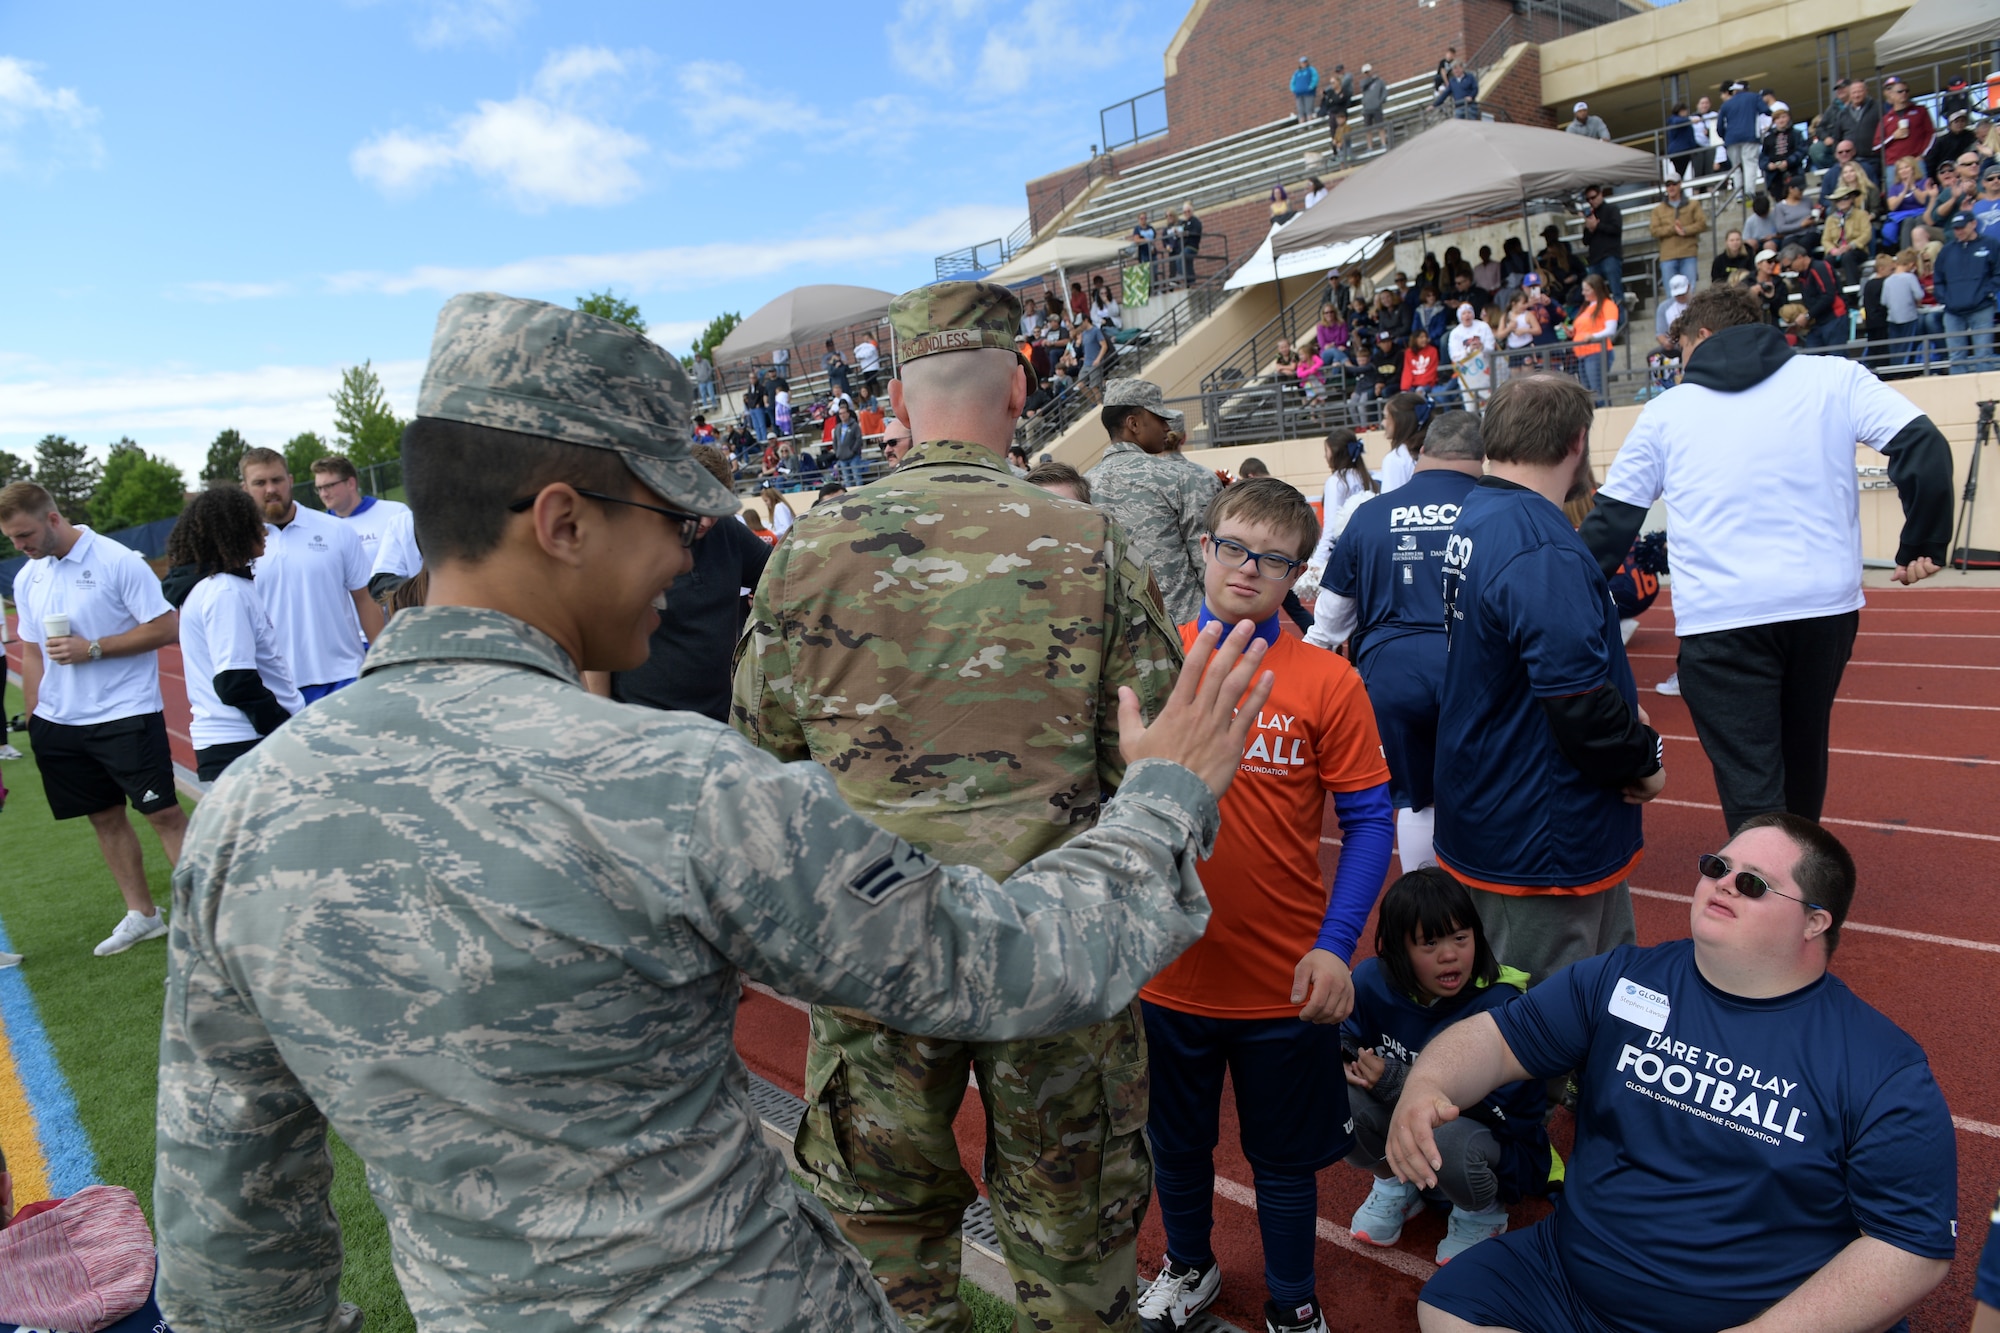 Airman 1st Class Darien Concepcion, 2nd Space Warning Squadron space systems operator, congratulates one of the players following the Dare to Play football game June 22, 2019, in Highlands Ranch, Colorado.